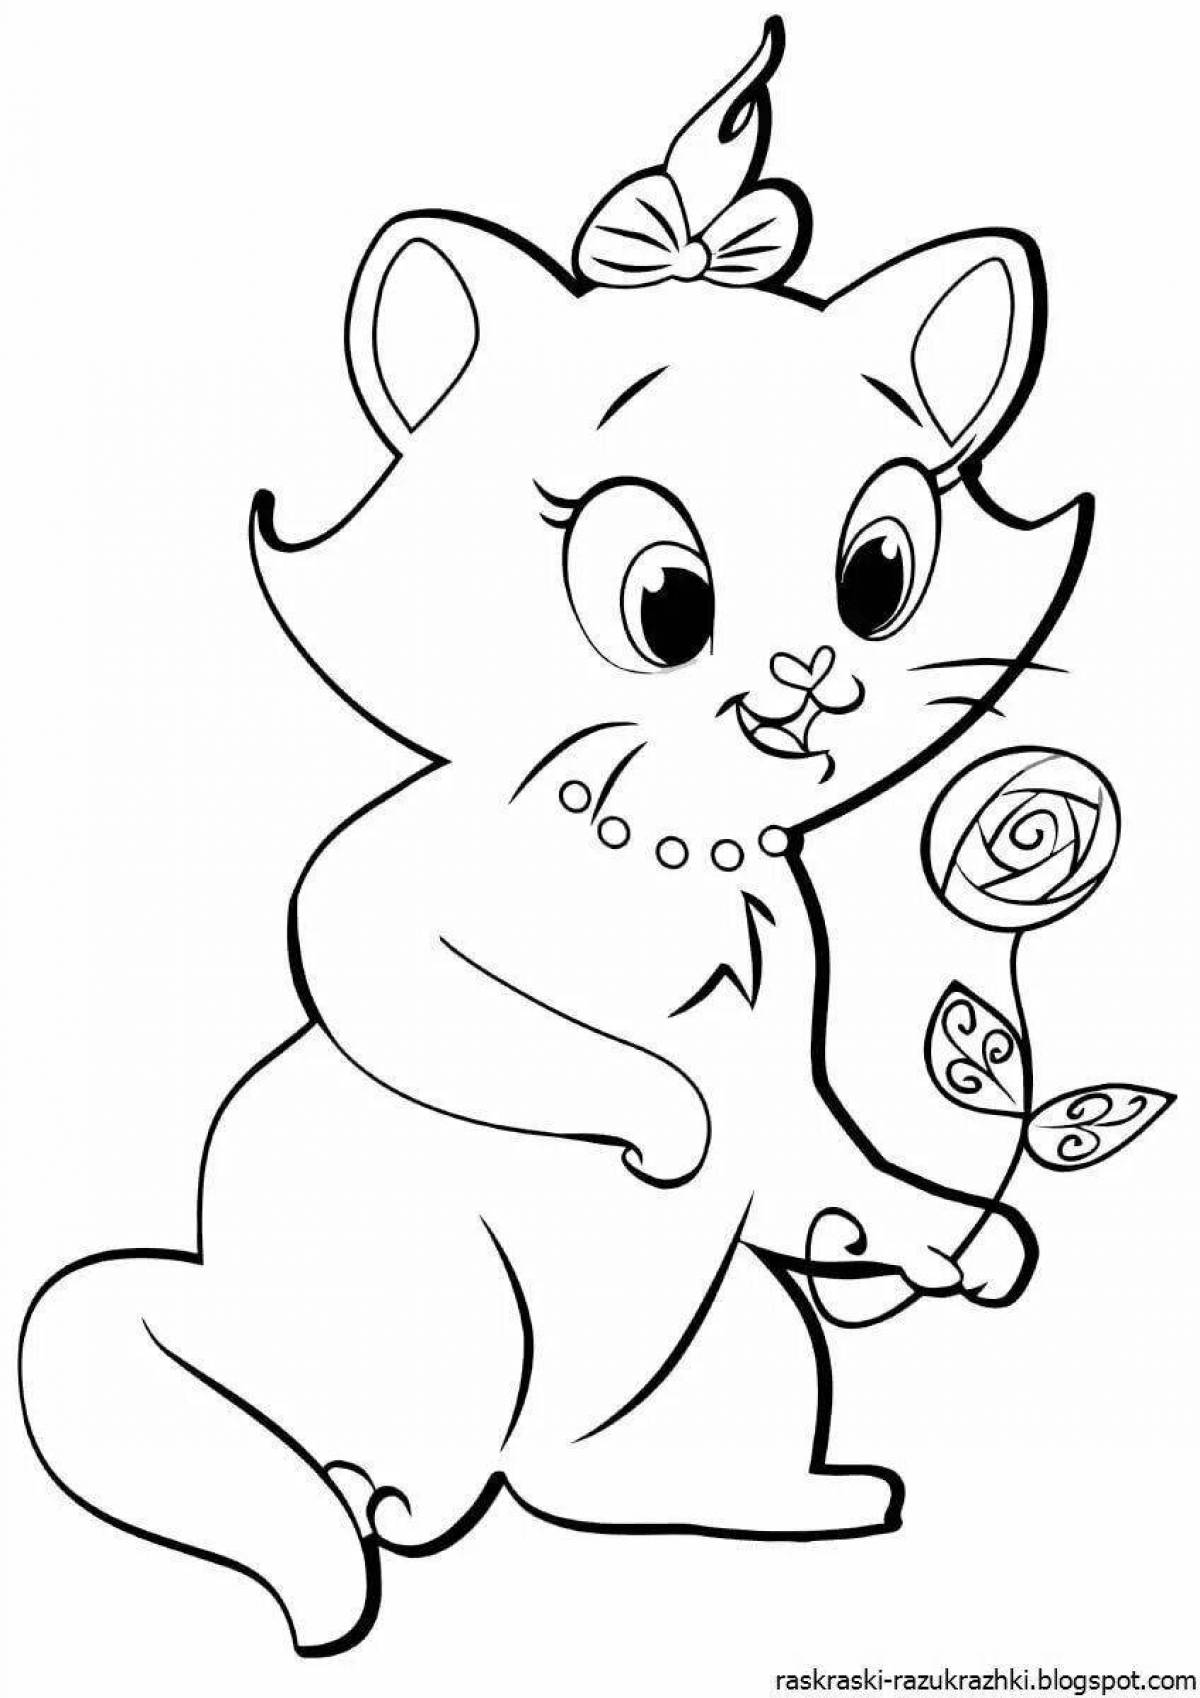 Coloring book funny kitten for children 3-4 years old